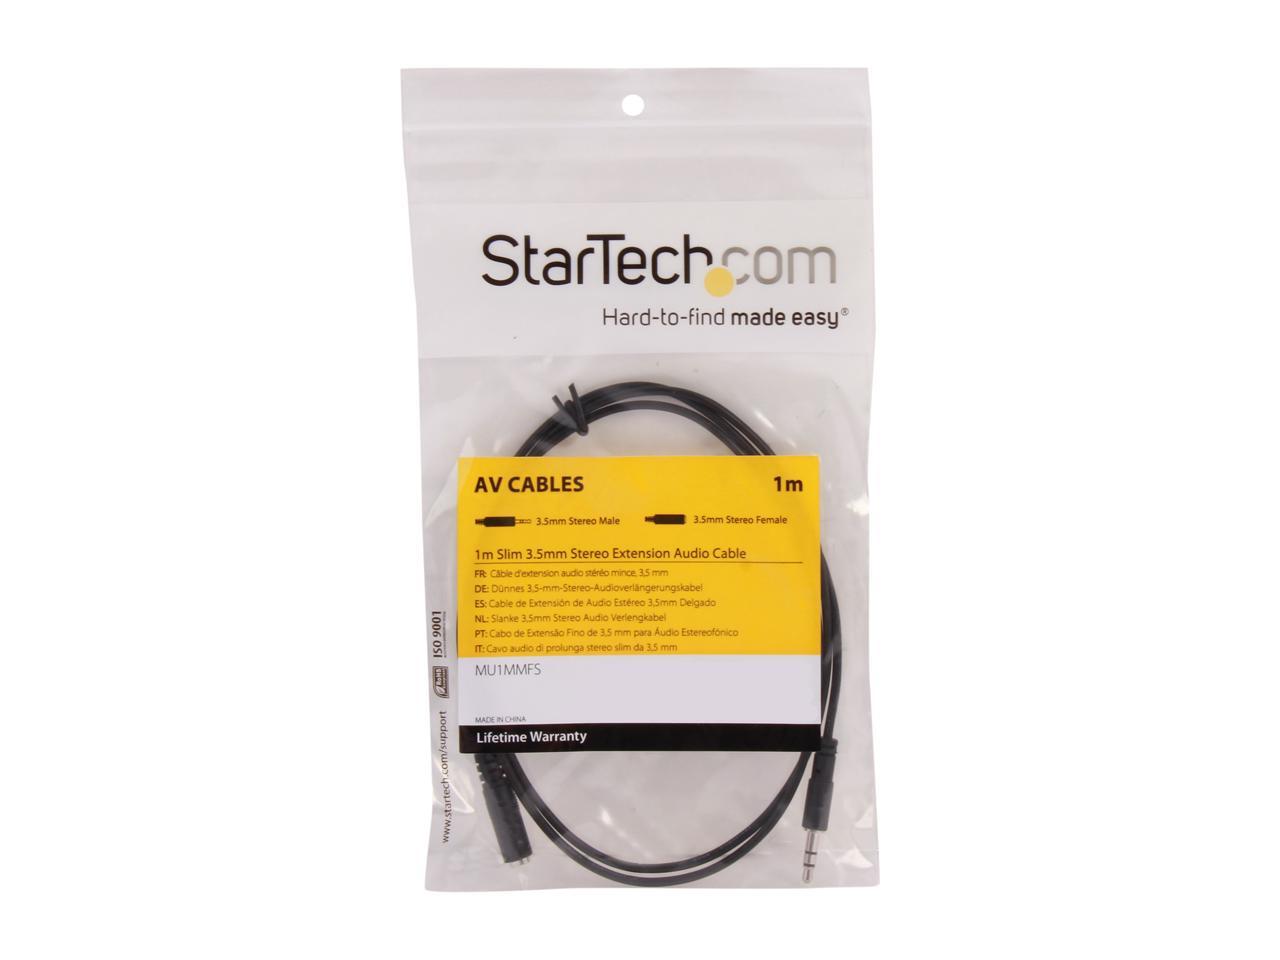 StarTech.com MU1MMFS 0.3" Slim 3.5mm Stereo Extension Audio Cable Male to Female